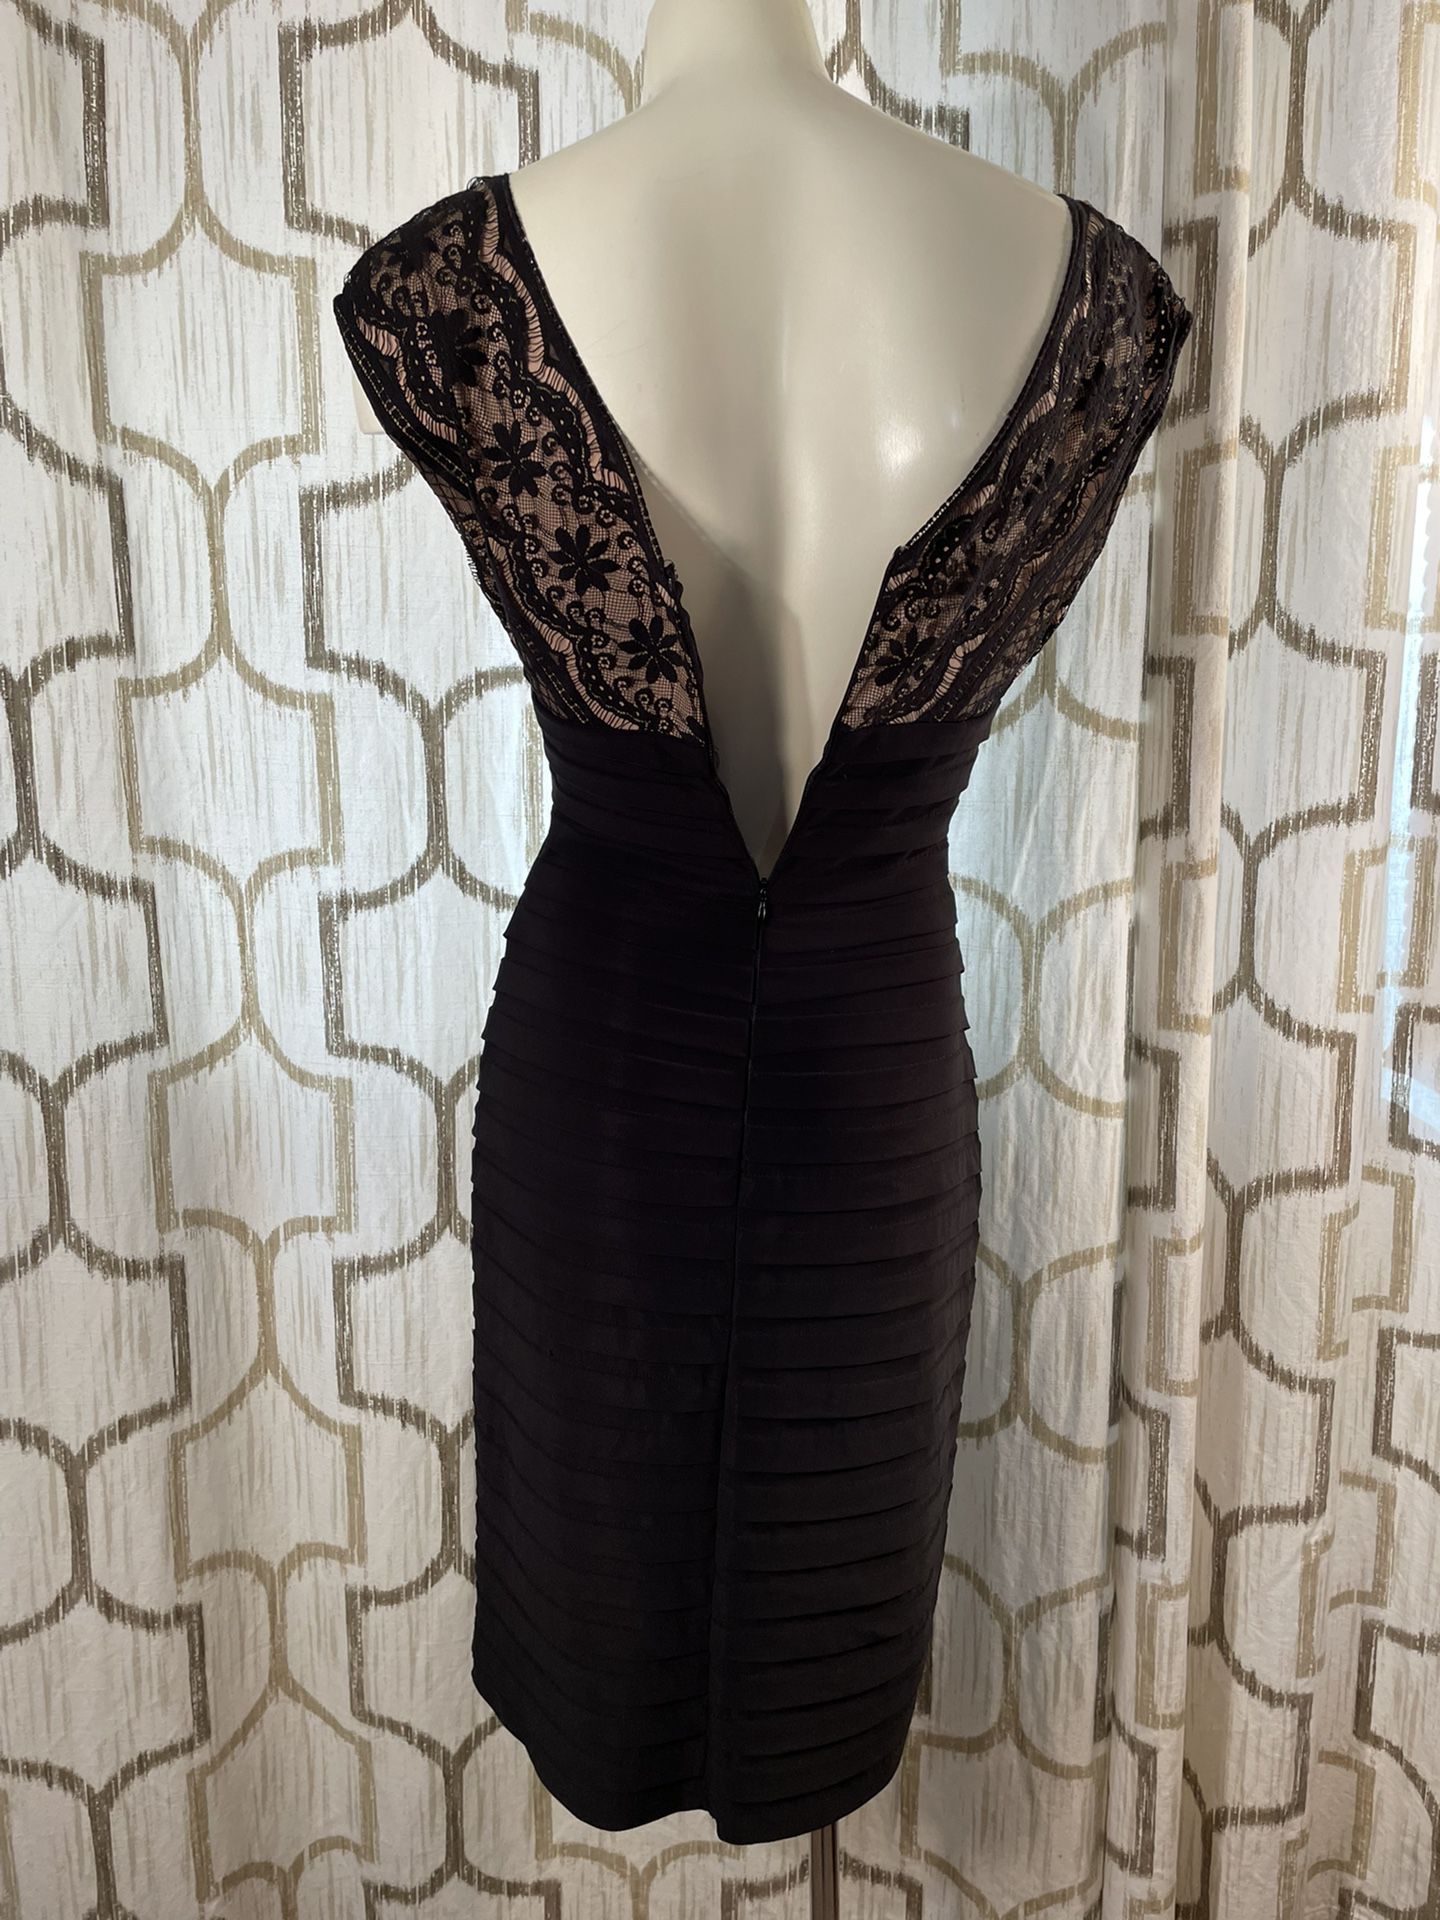 Size 6 Adrianna Pappell dress